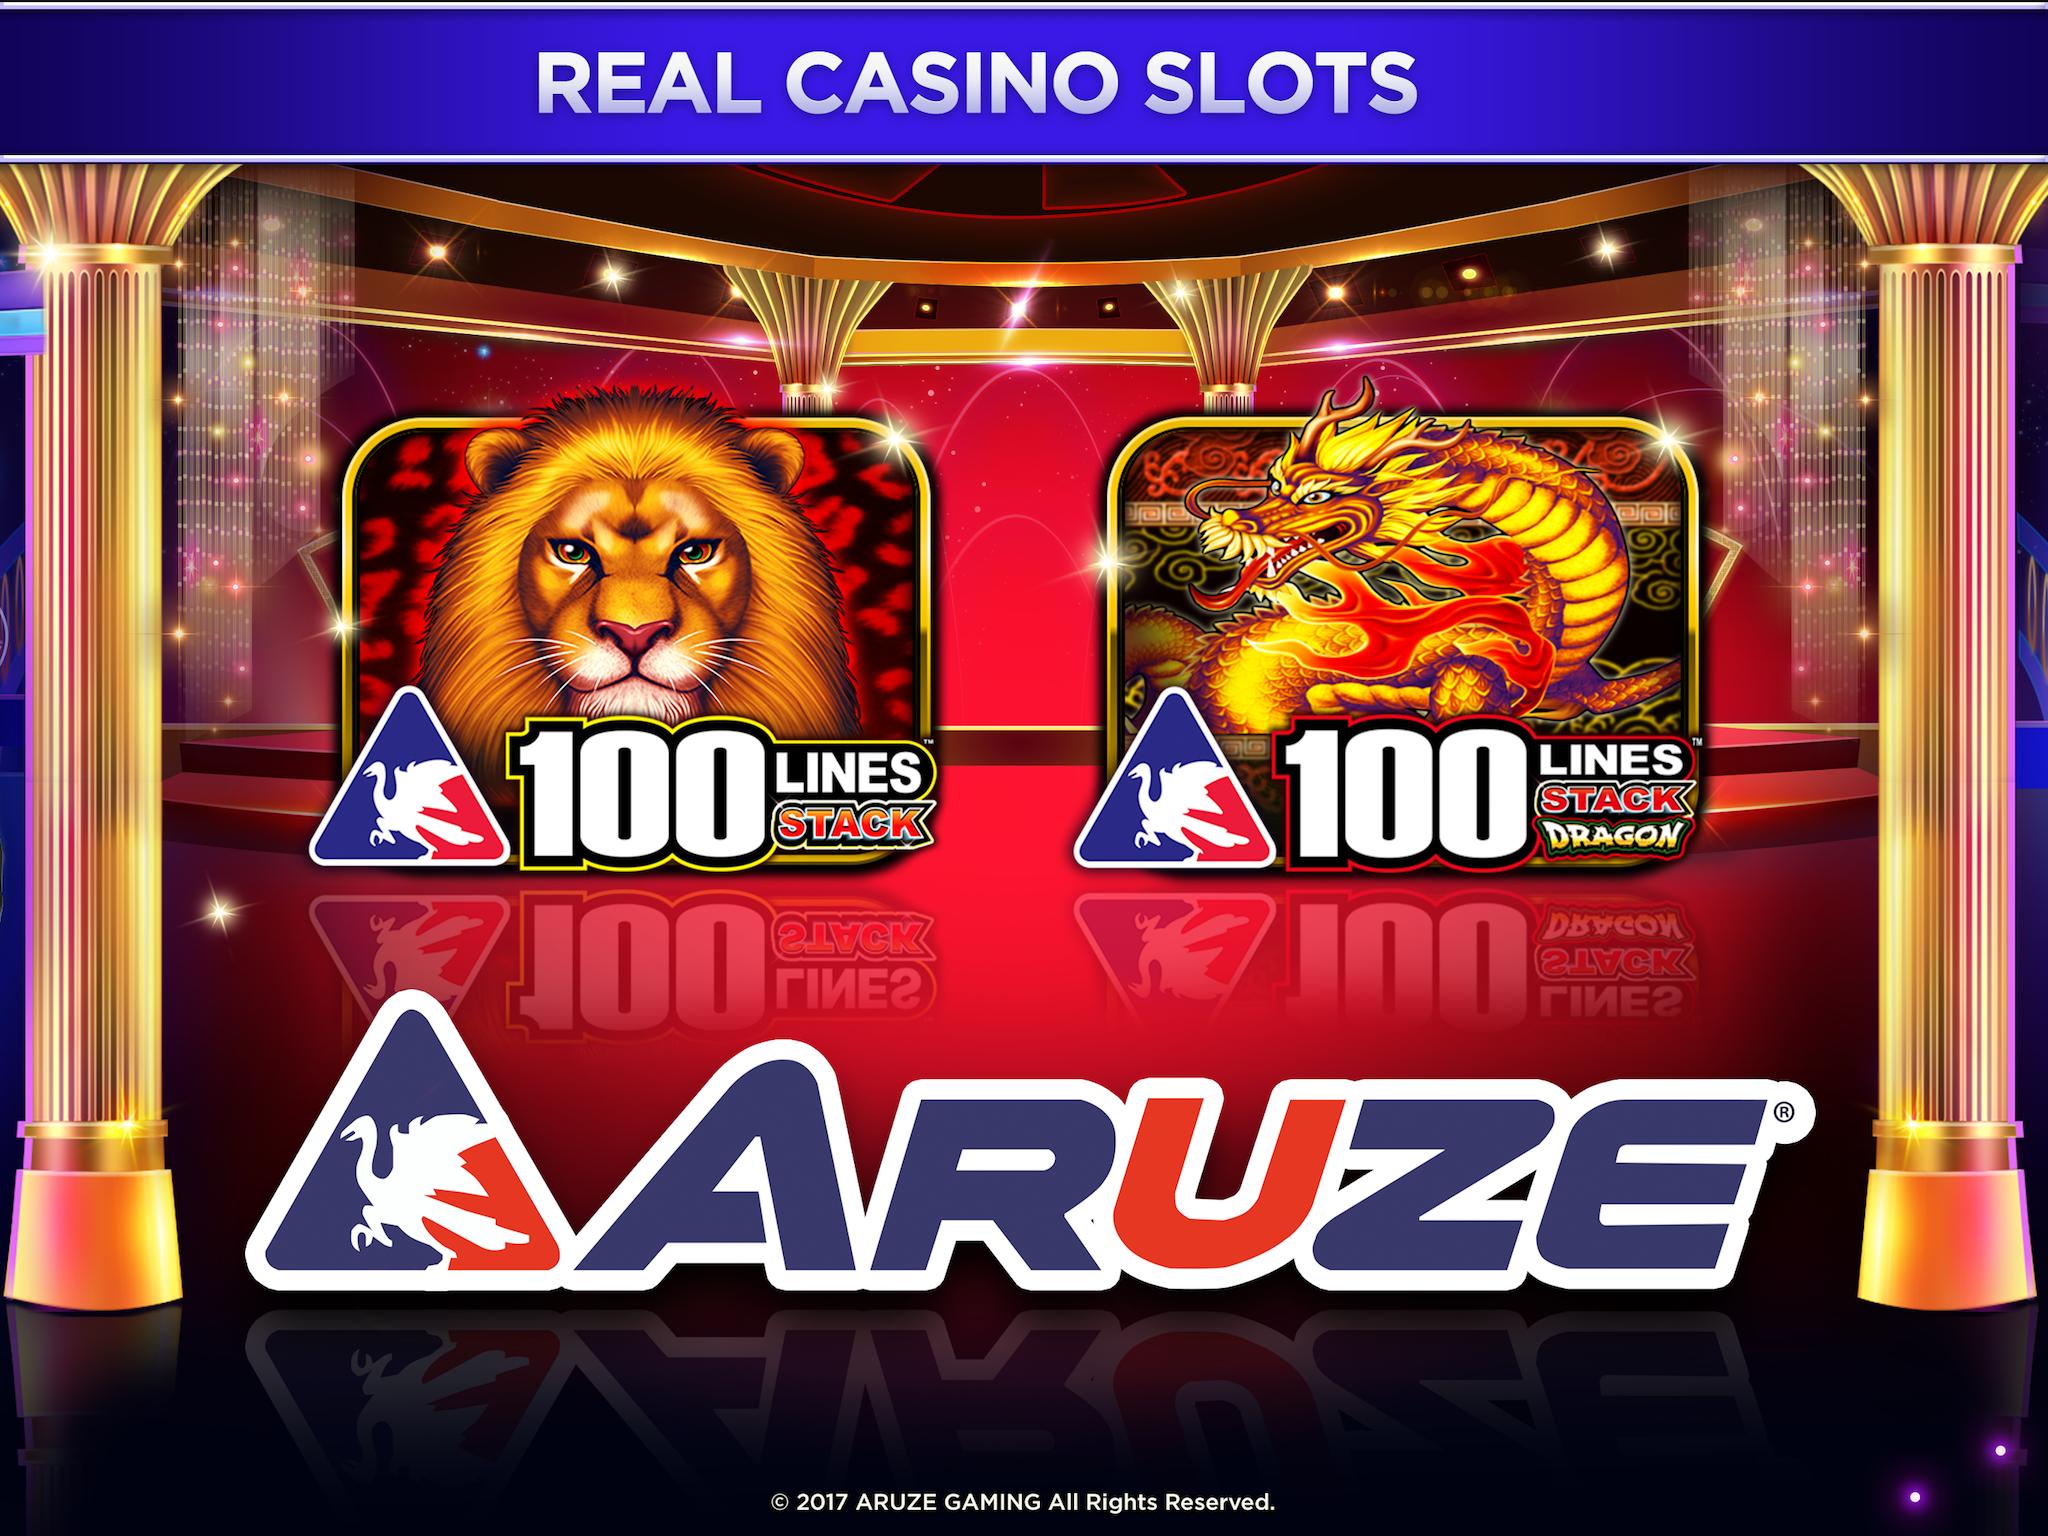 Wheel of Fortune Slots Casino for Android - APK Download2048 x 1536